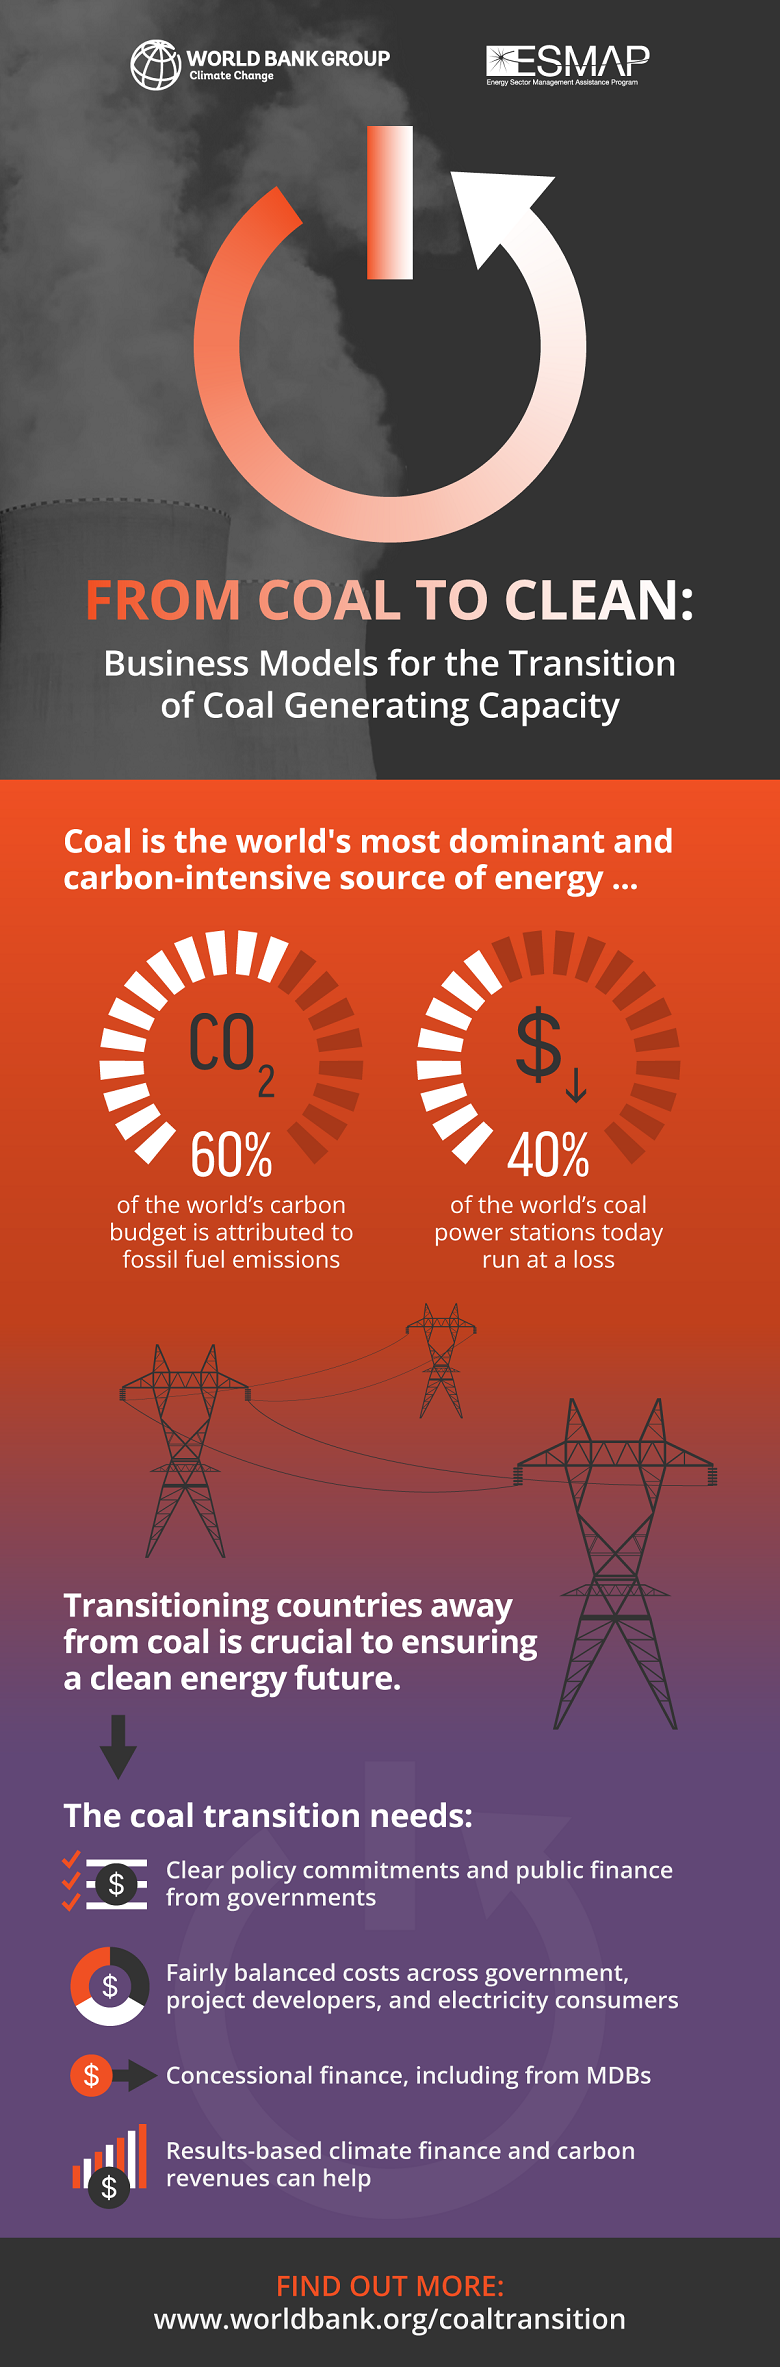 From Coal to Clean: Business Models for the Transition of Coal Generating Capacity